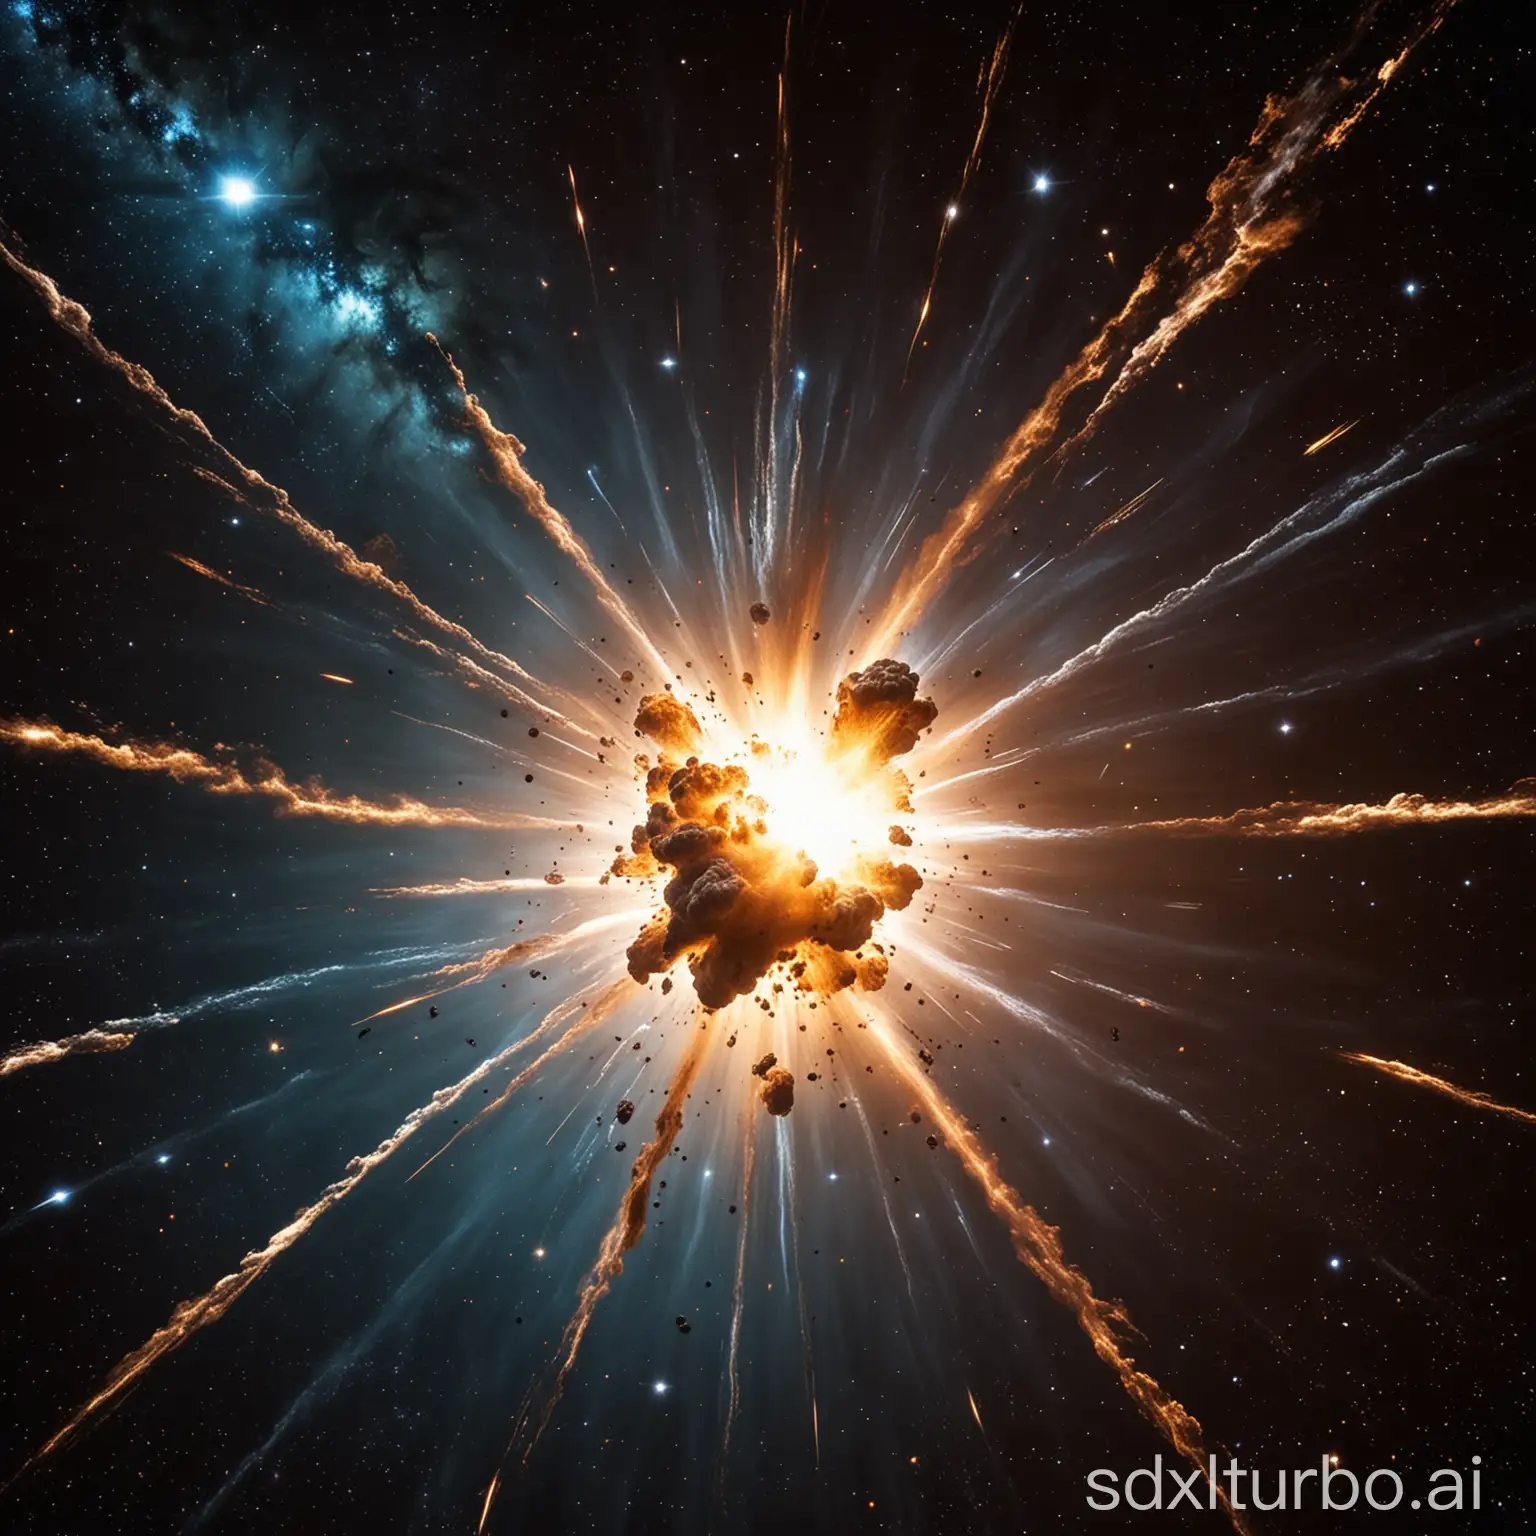 Explosion-in-Space-Amidst-a-Starry-Cosmos